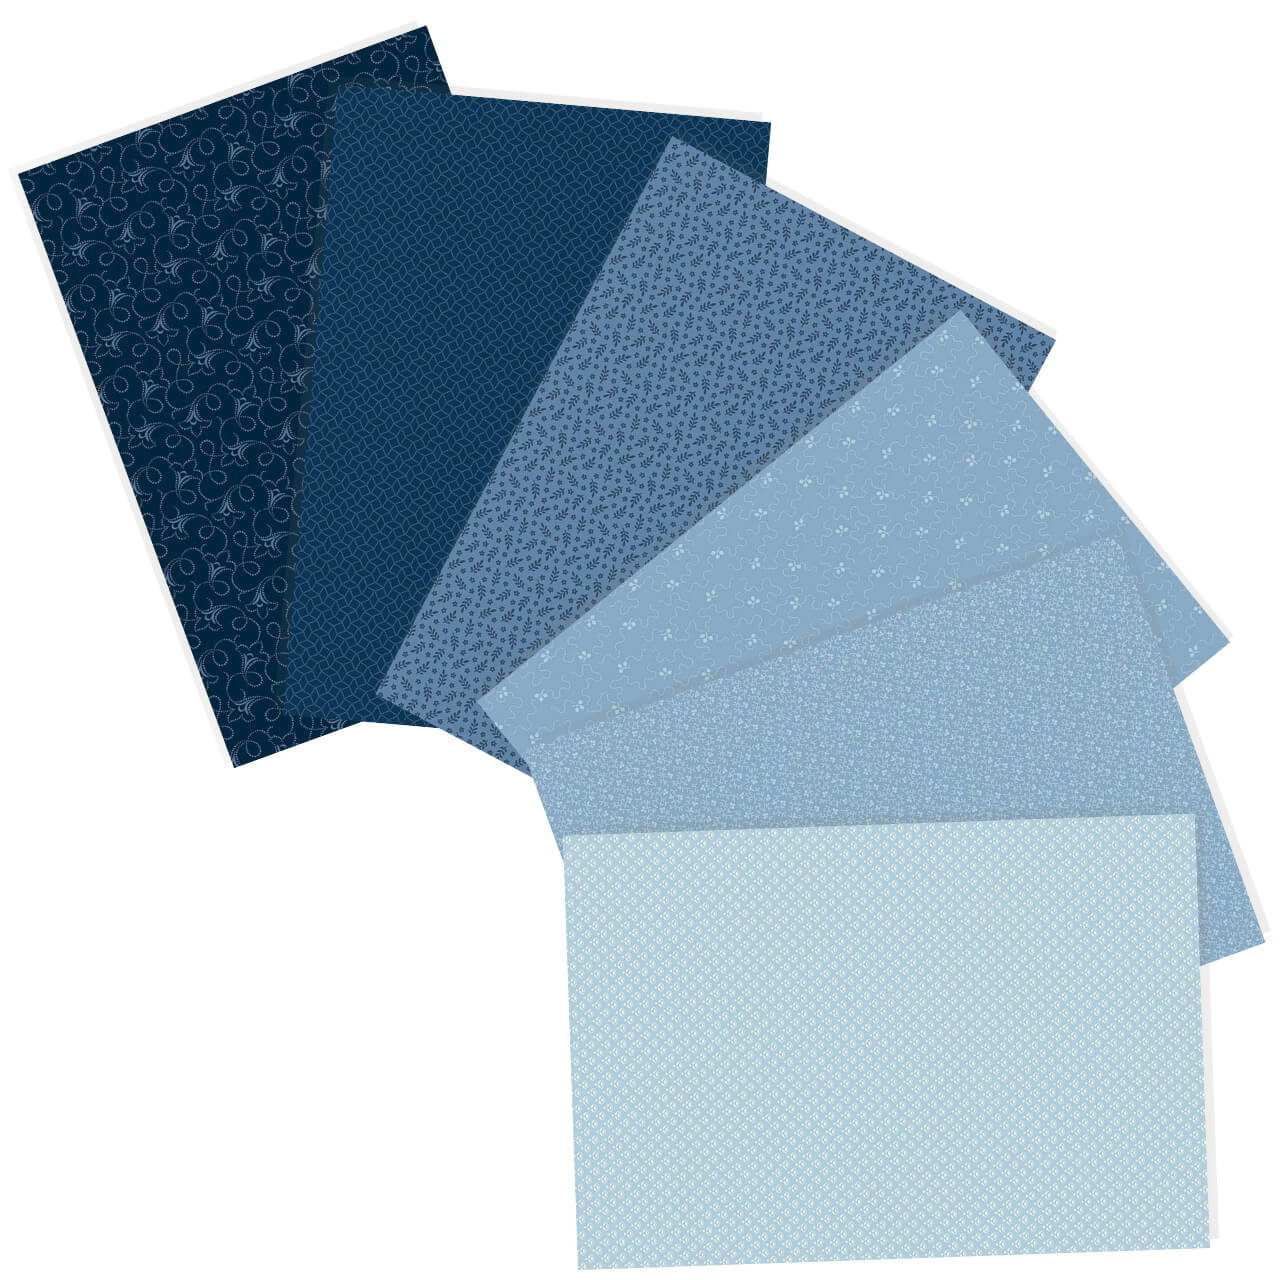 Assortment of six blue fat quarters from Andover Fabrics' Tonal Ditsy Blue Indigo collection featuring varied patterns.